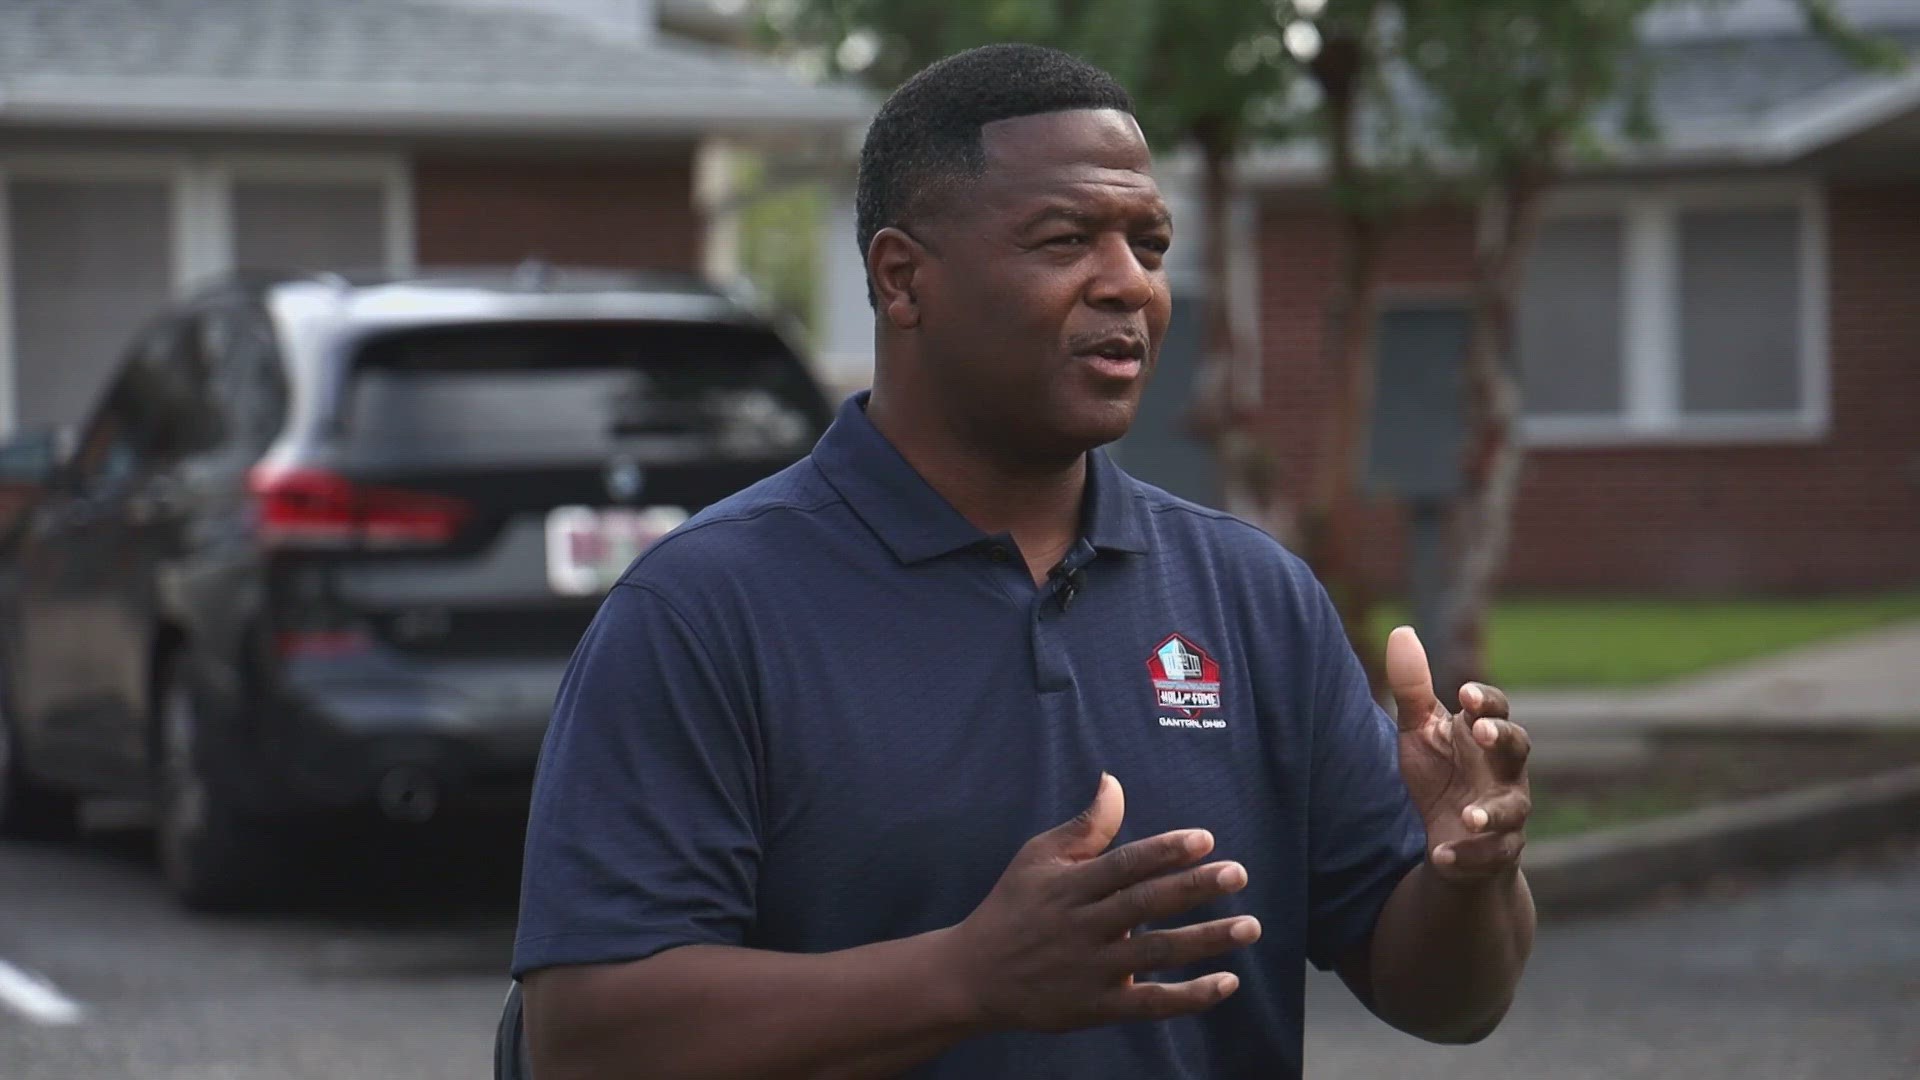 Despite being a Super Bowl champion and an NFL Hall of Famer, Jacksonville native LeRoy Butler details how his upbringing inspired him to create change in the city.